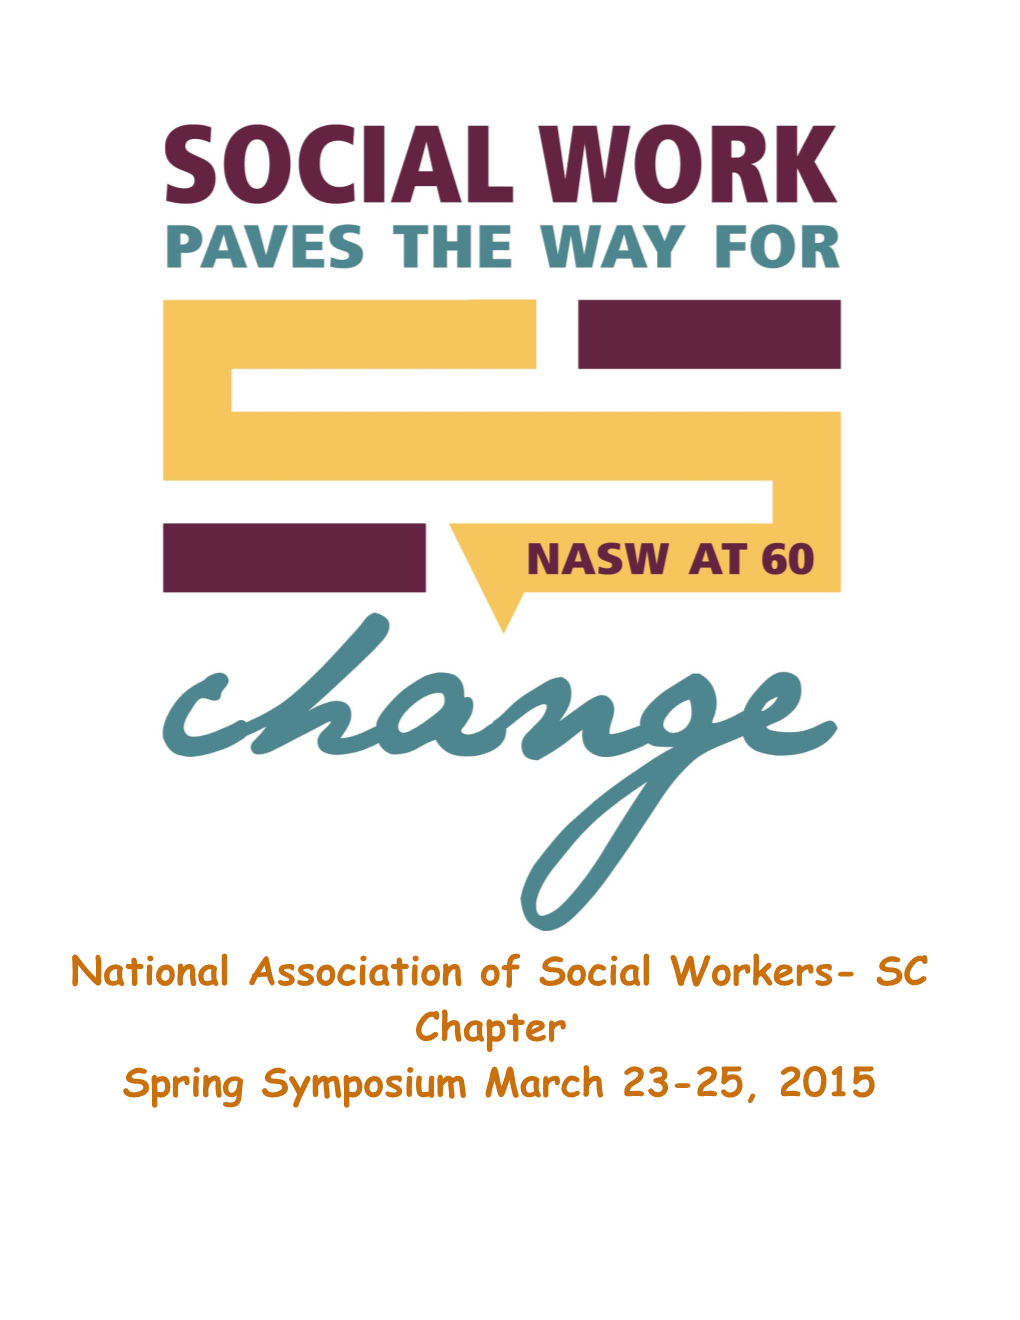 National Association of Social Workers- SC Chapter